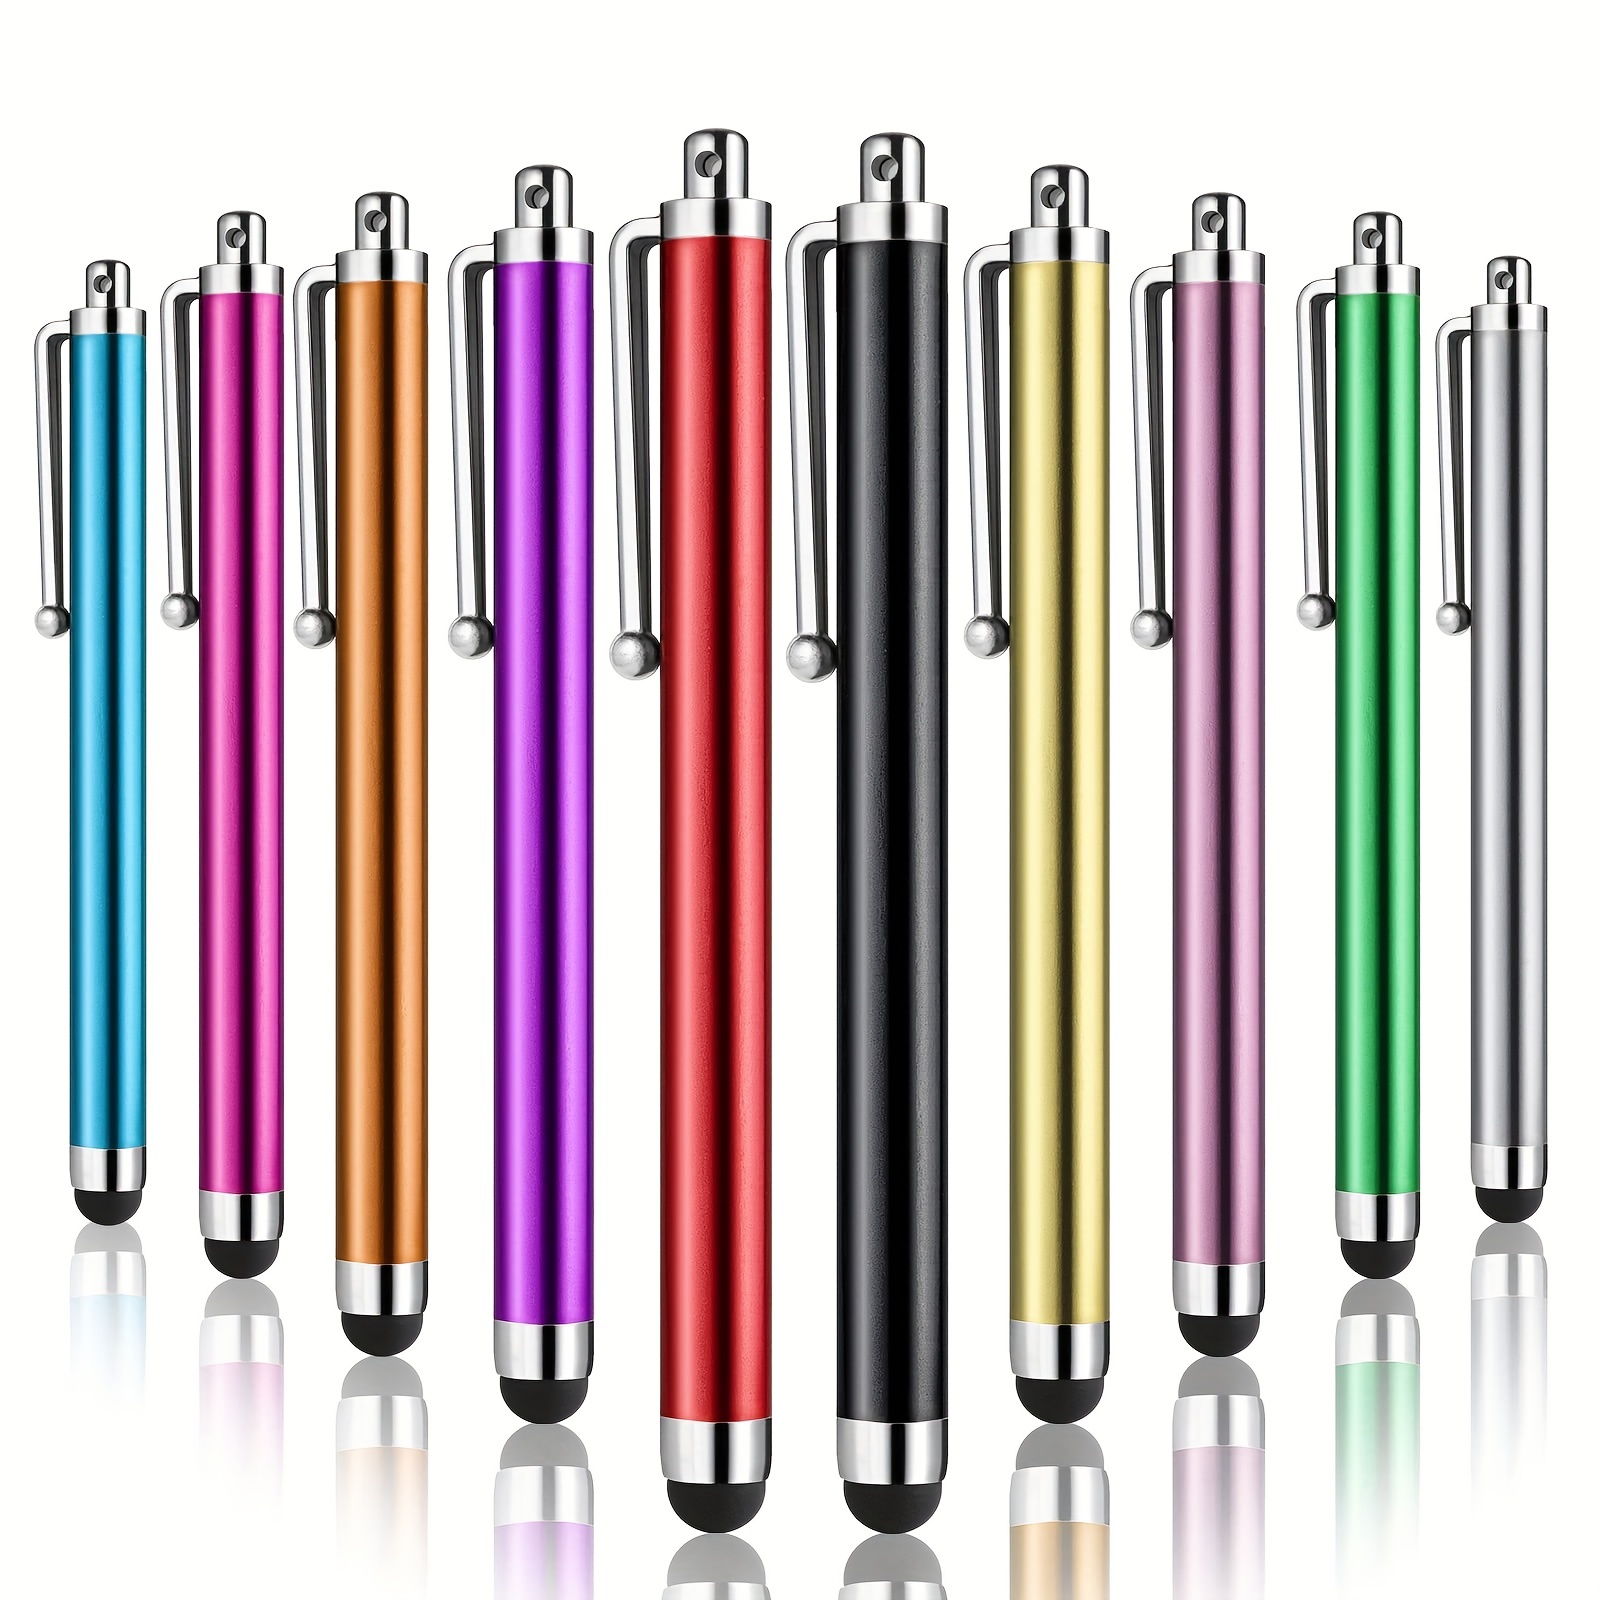 

Touch Screen Stylus Abiarst High Precision Universal Stylus Suitable For Ipad For Iphone Tablet For Galaxy Full Capacitive Touch Screen (10pcs/ Pack)